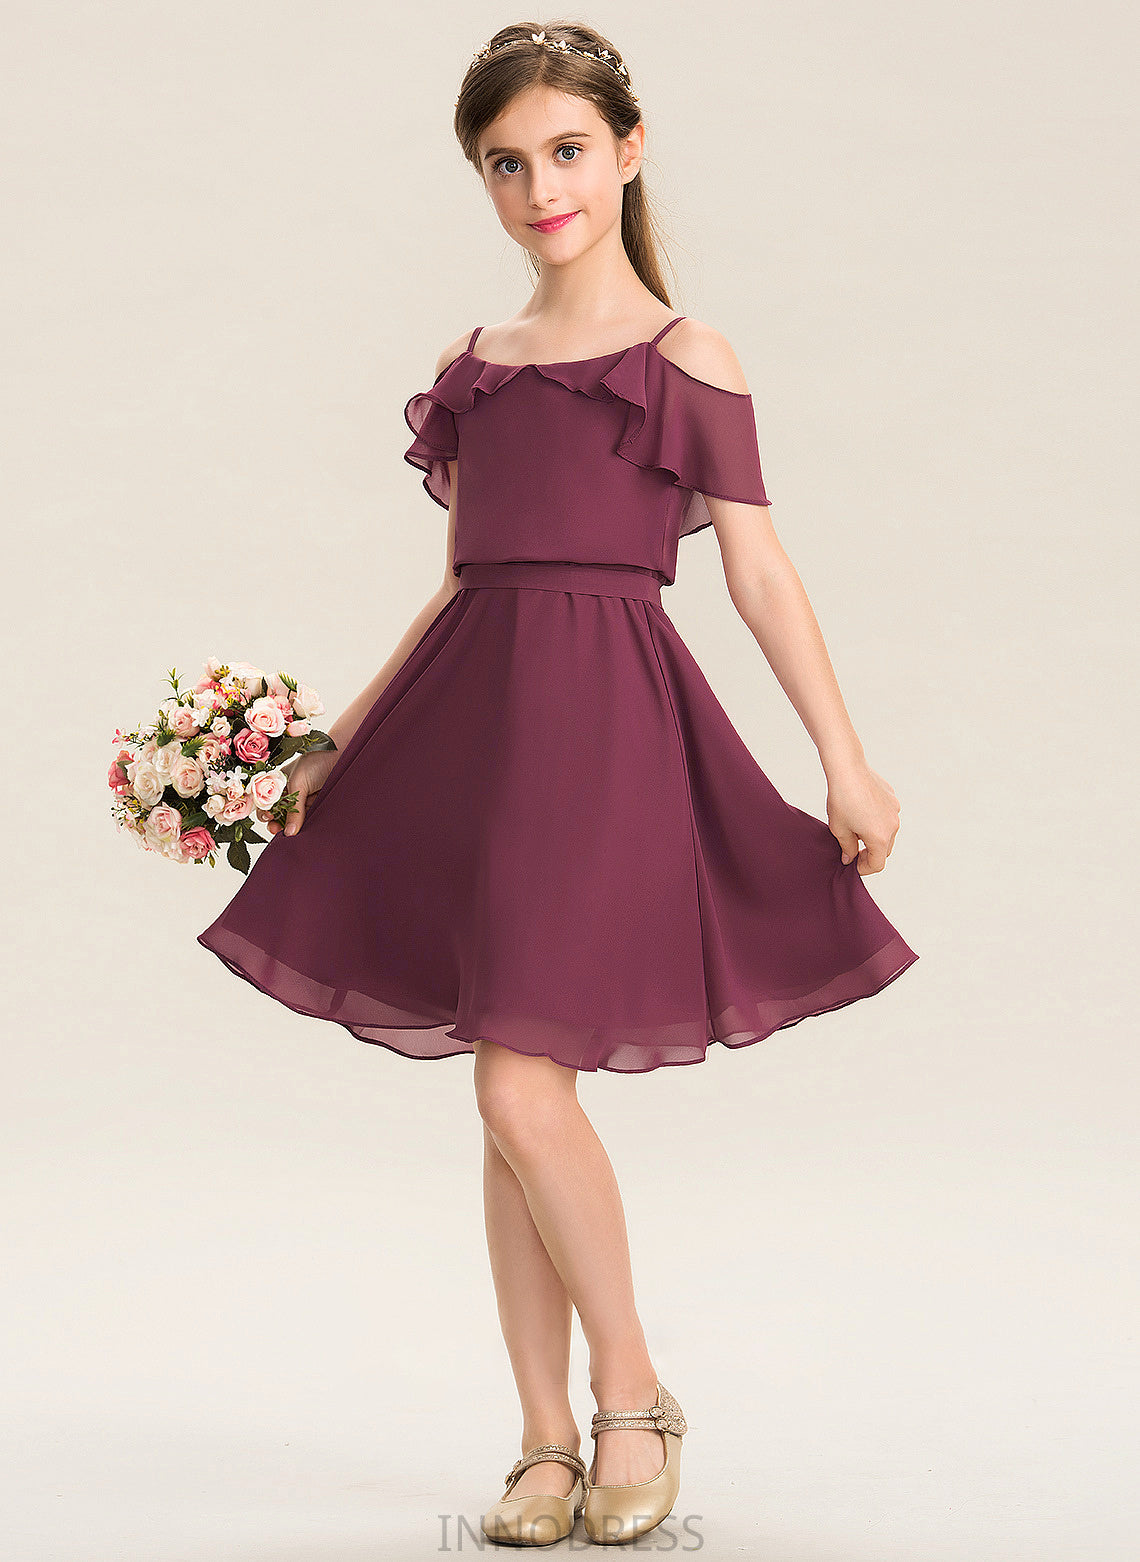 With Chiffon Junior Bridesmaid Dresses Kinsley Knee-Length A-Line Bow(s) Cascading Ruffles Off-the-Shoulder